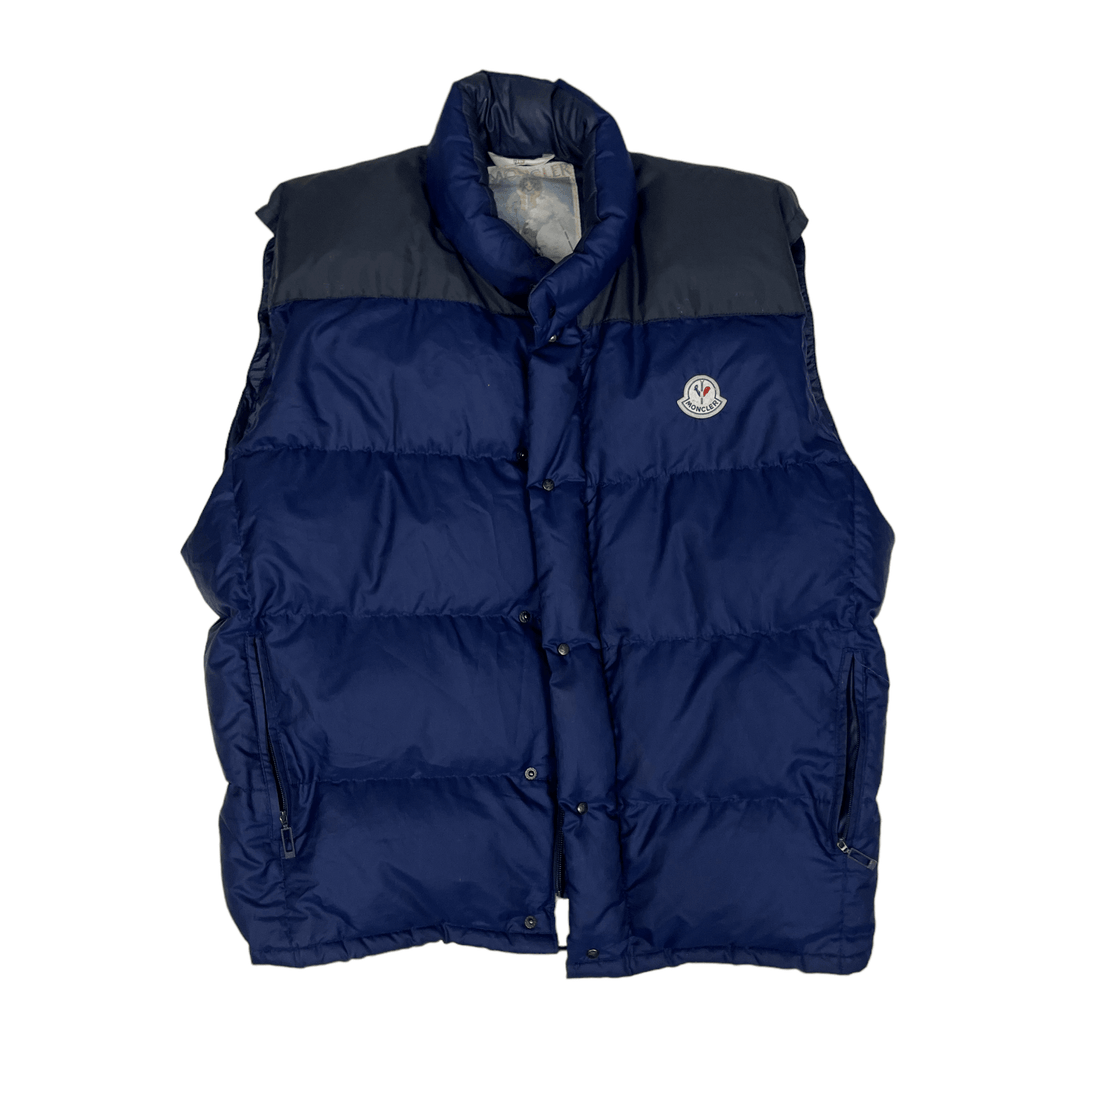 Vintage 90s Navy Blue Moncler Puffer Gilet - Extra Large - The Streetwear Studio